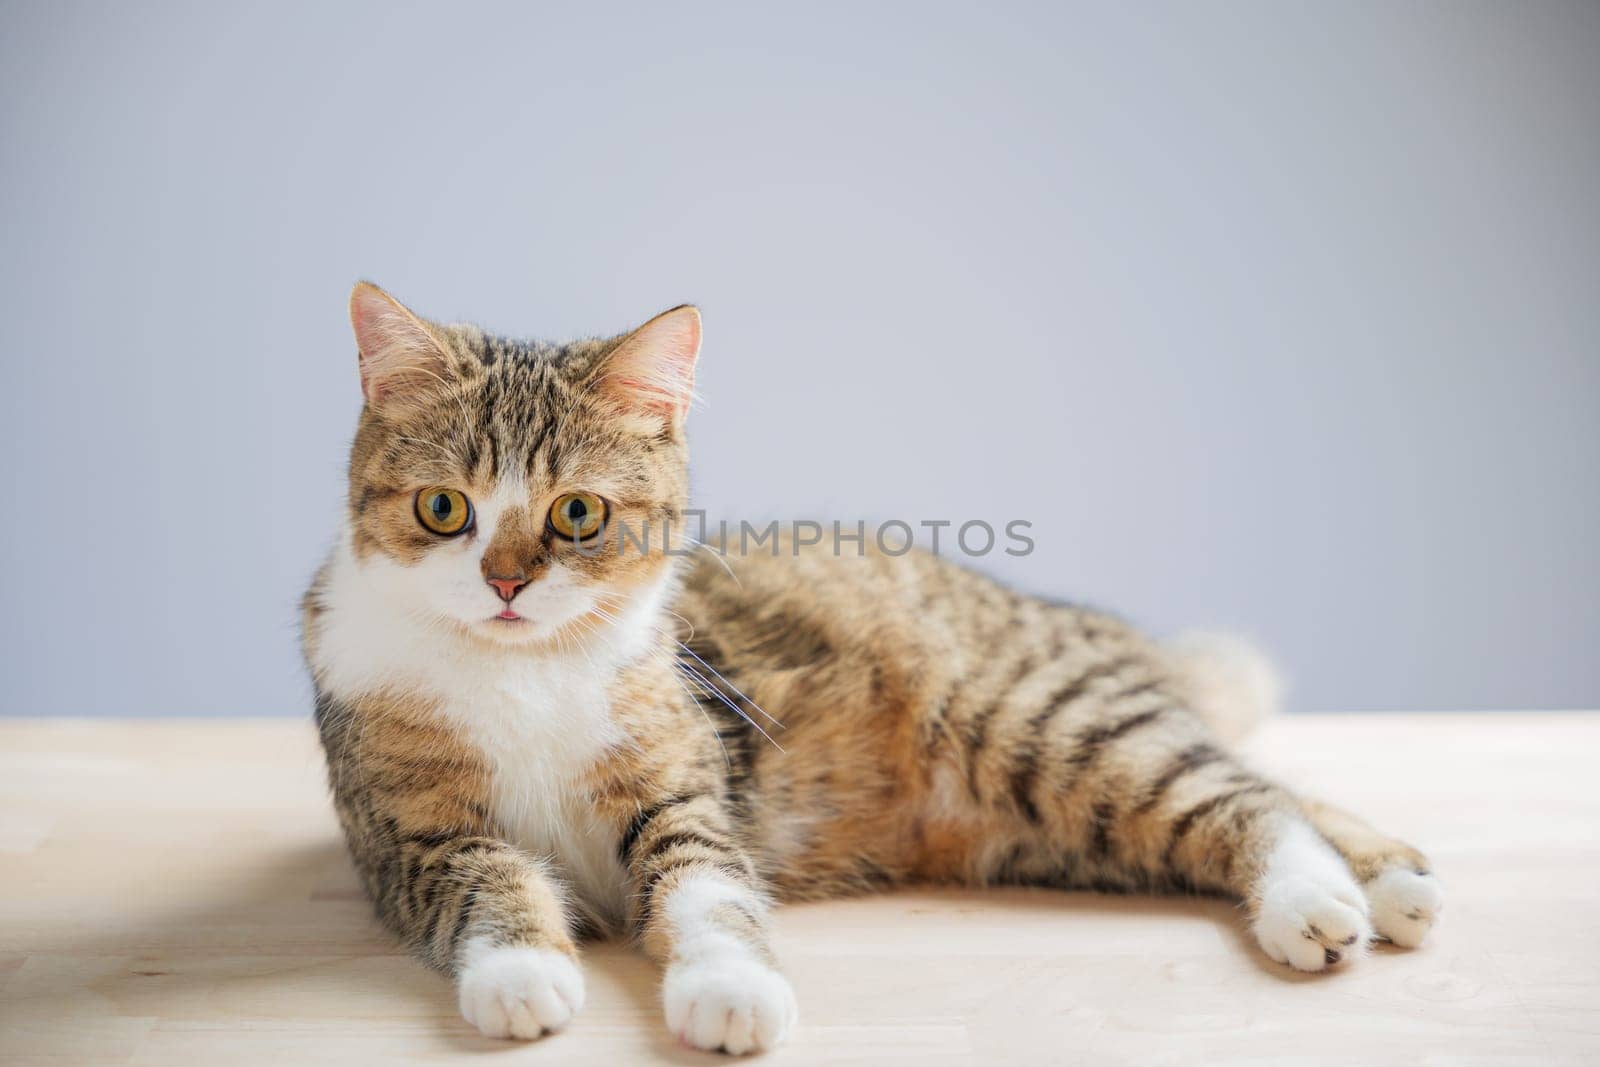 The isolated image captures a cheerful little grey Scottish Fold cat on a white background, standing with a straight tail, showcasing its playful and endearing nature. by Sorapop